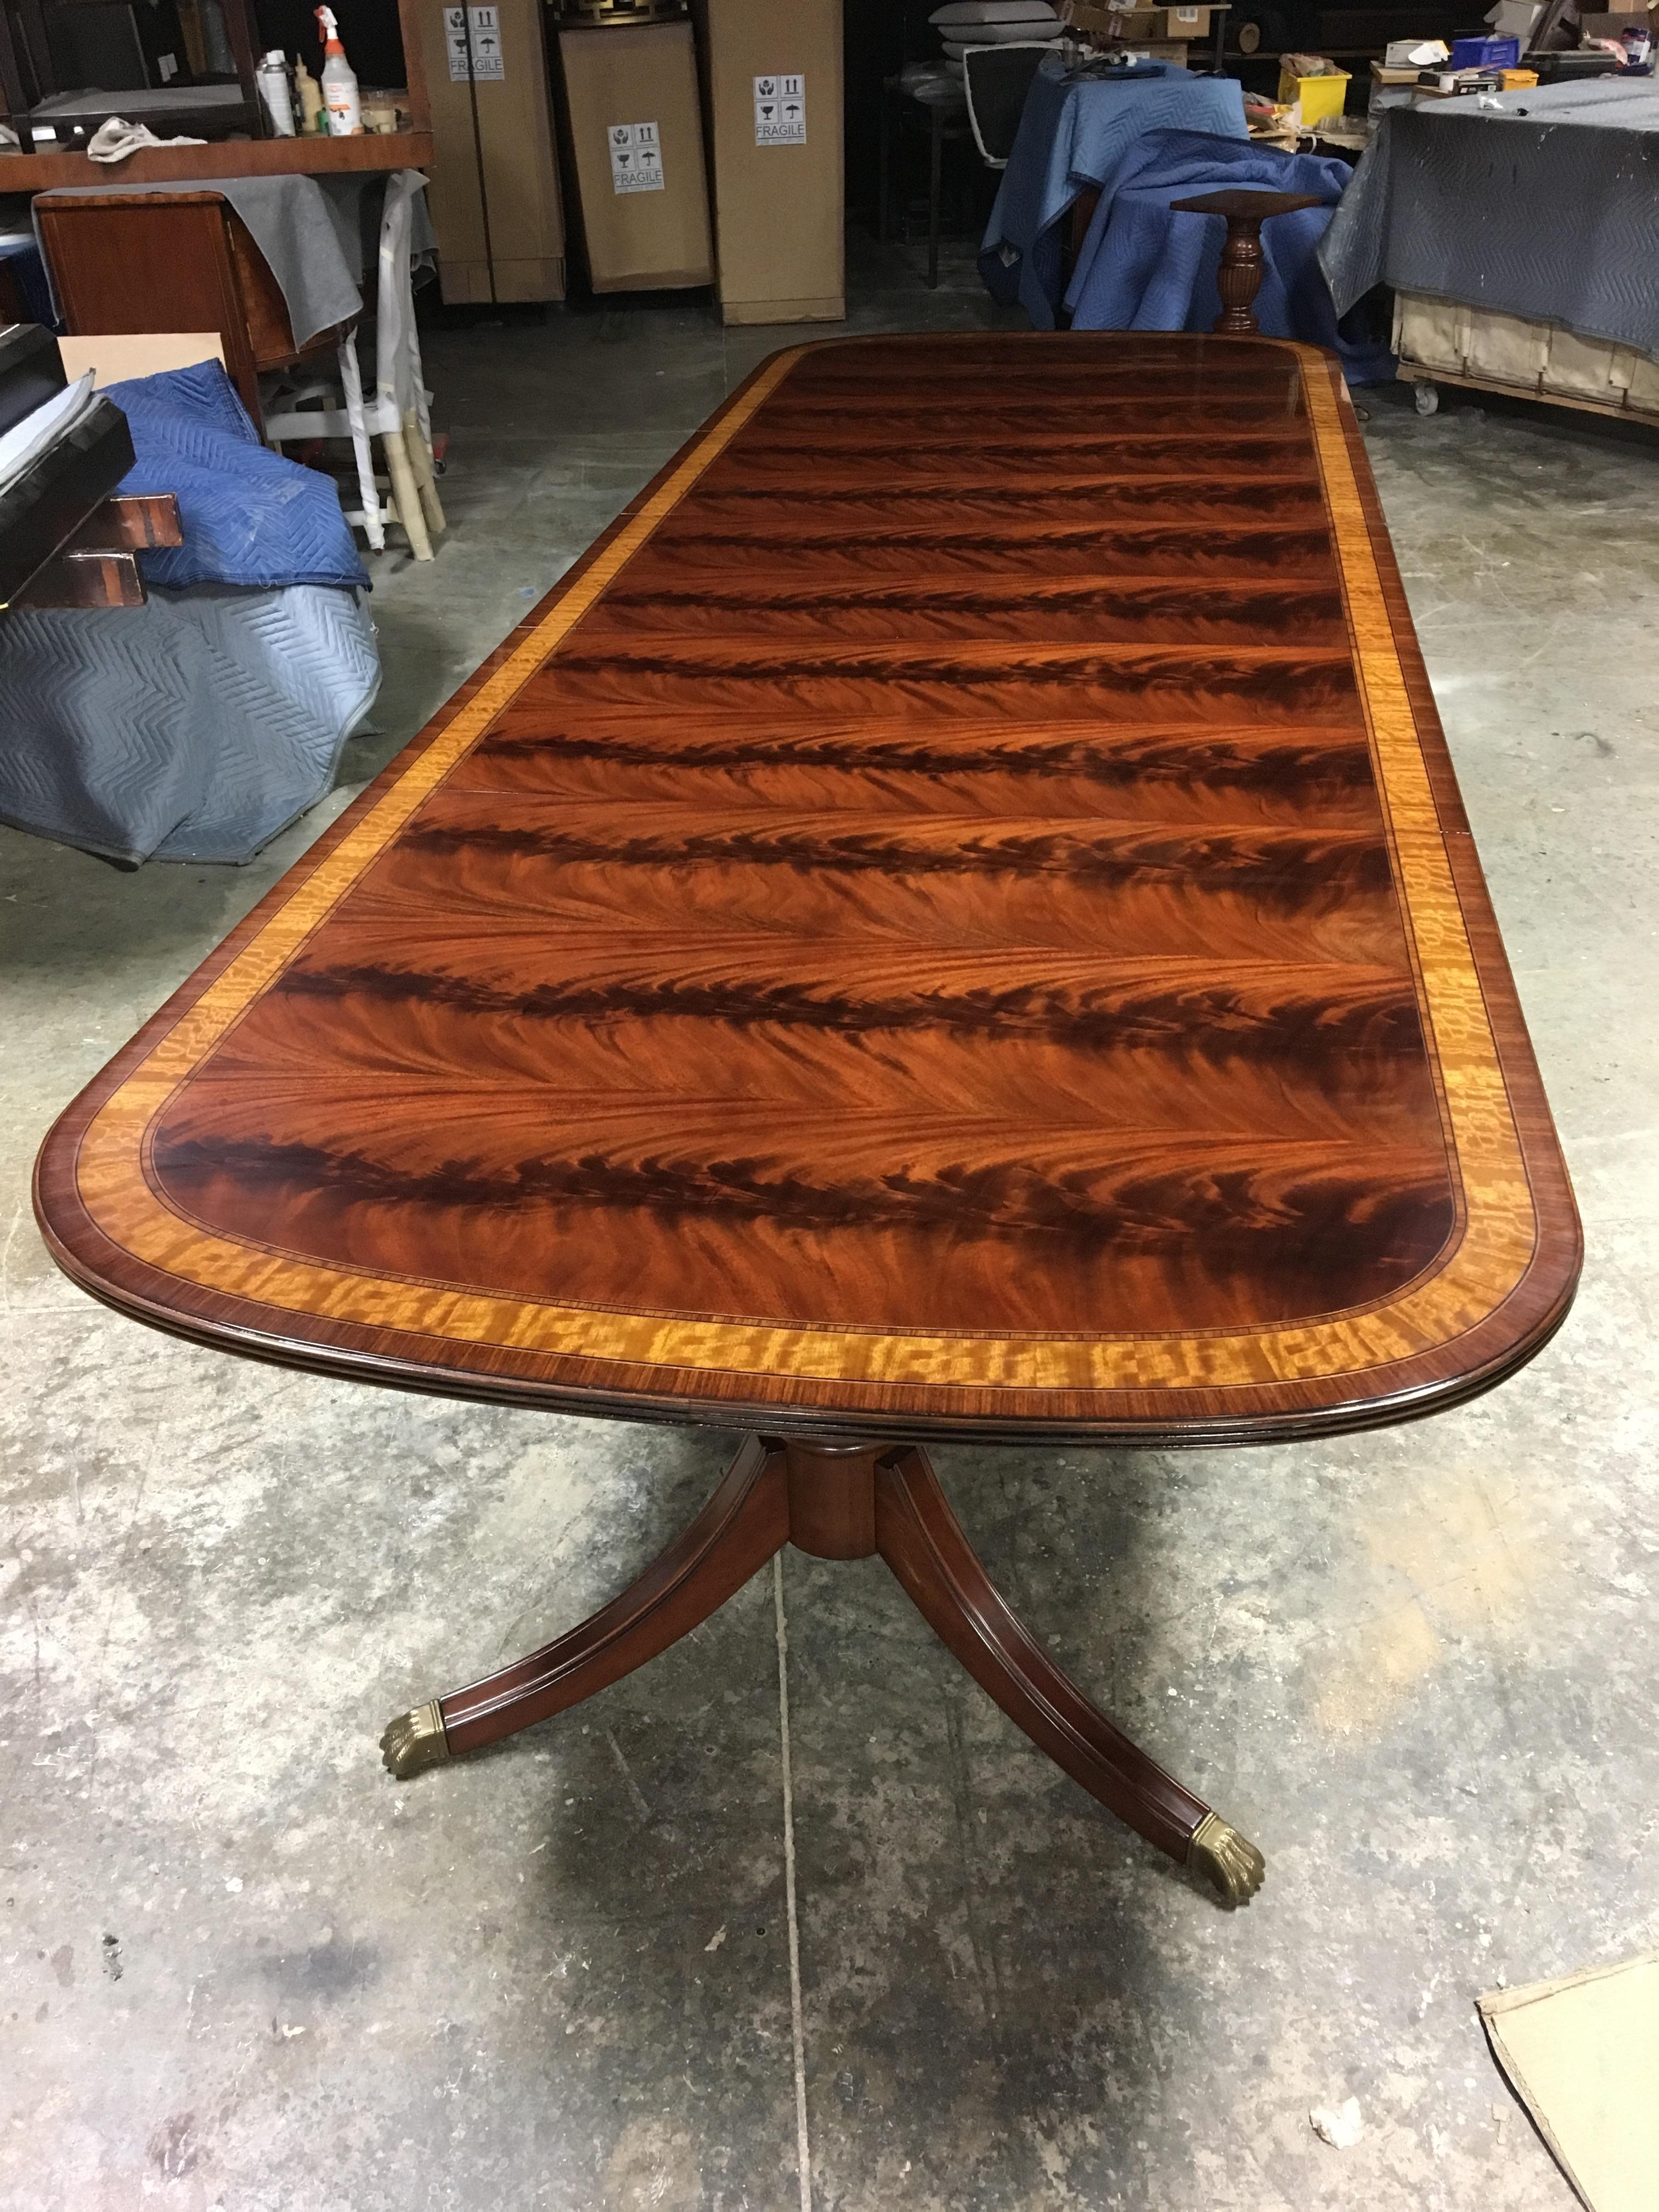 This is a made-to-order Large Traditional mahogany dining table made in the Leighton Hall shop. It features a field of slip-matched swirly crotch mahogany from West Africa and satinwood and santos rosewood borders from South America. The borders are